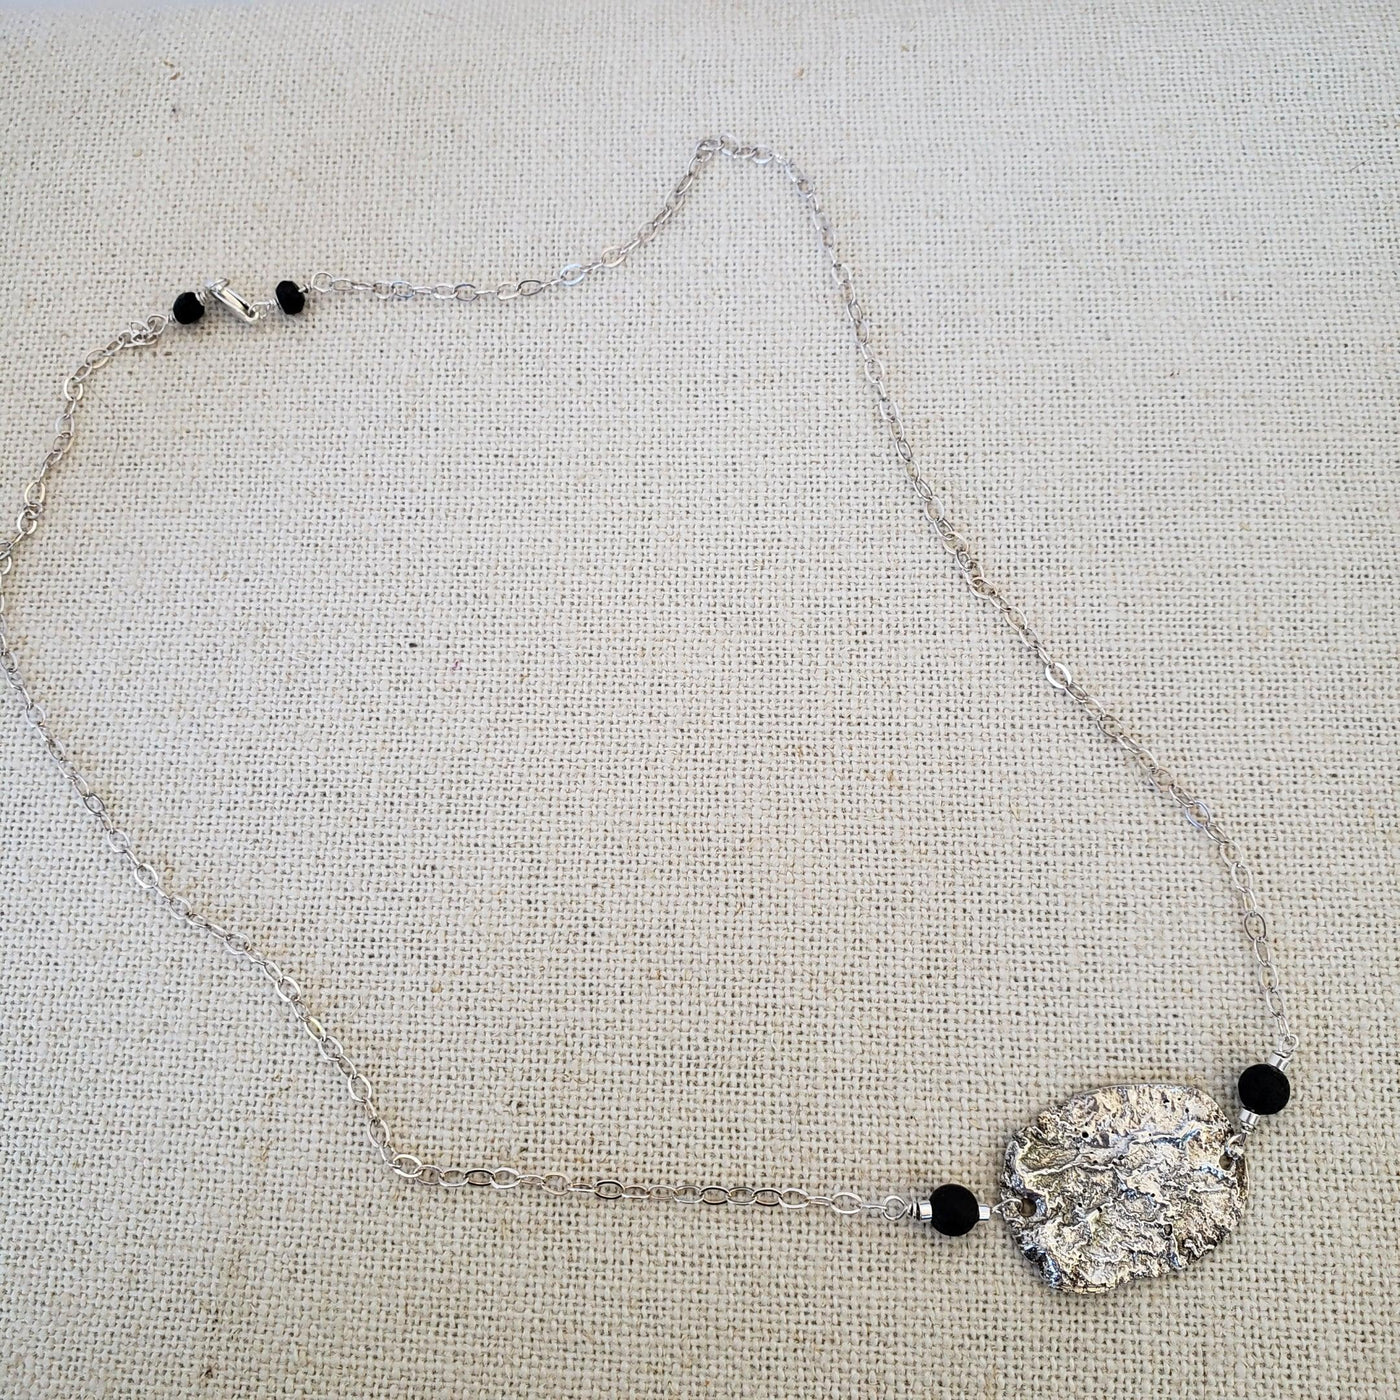 Reticulated silver necklace